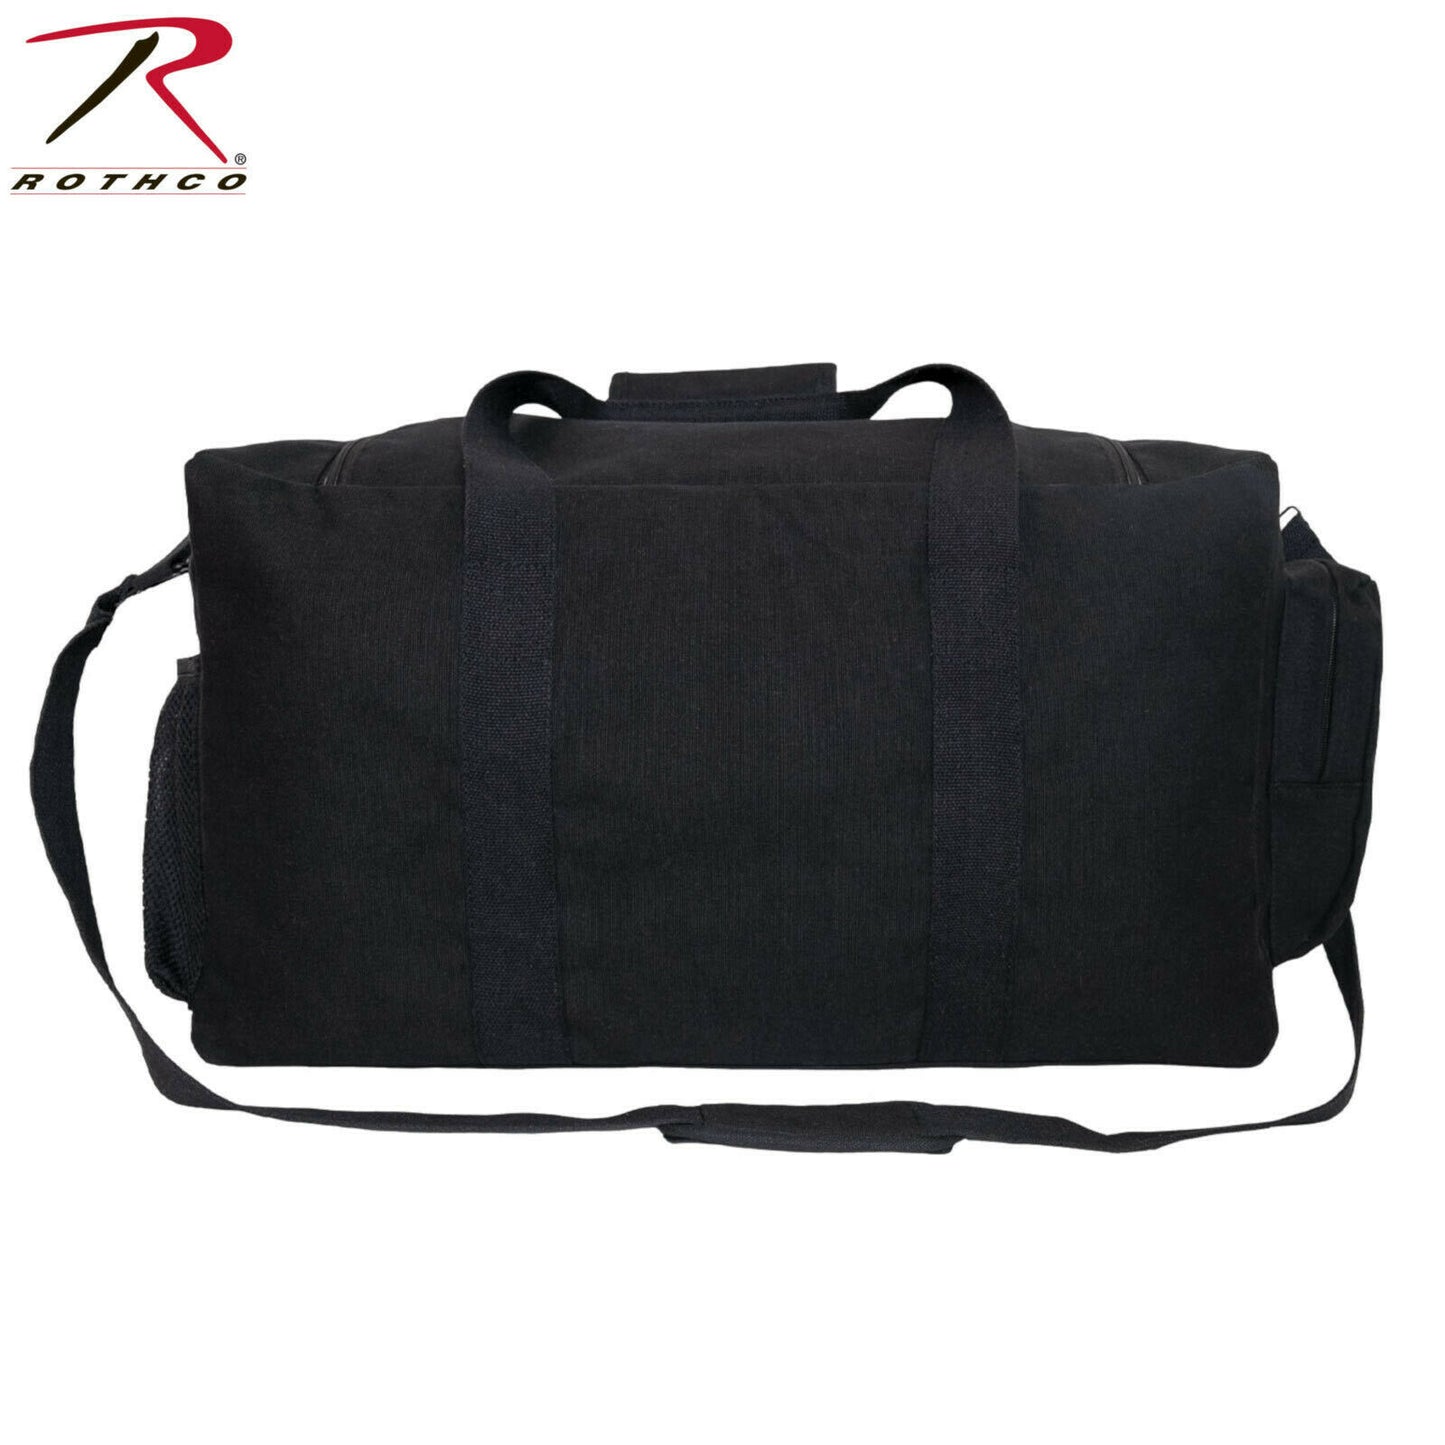 Rothco Canvas Pocketed Gear Bag - Black Extra Large Tactical Gear Bag